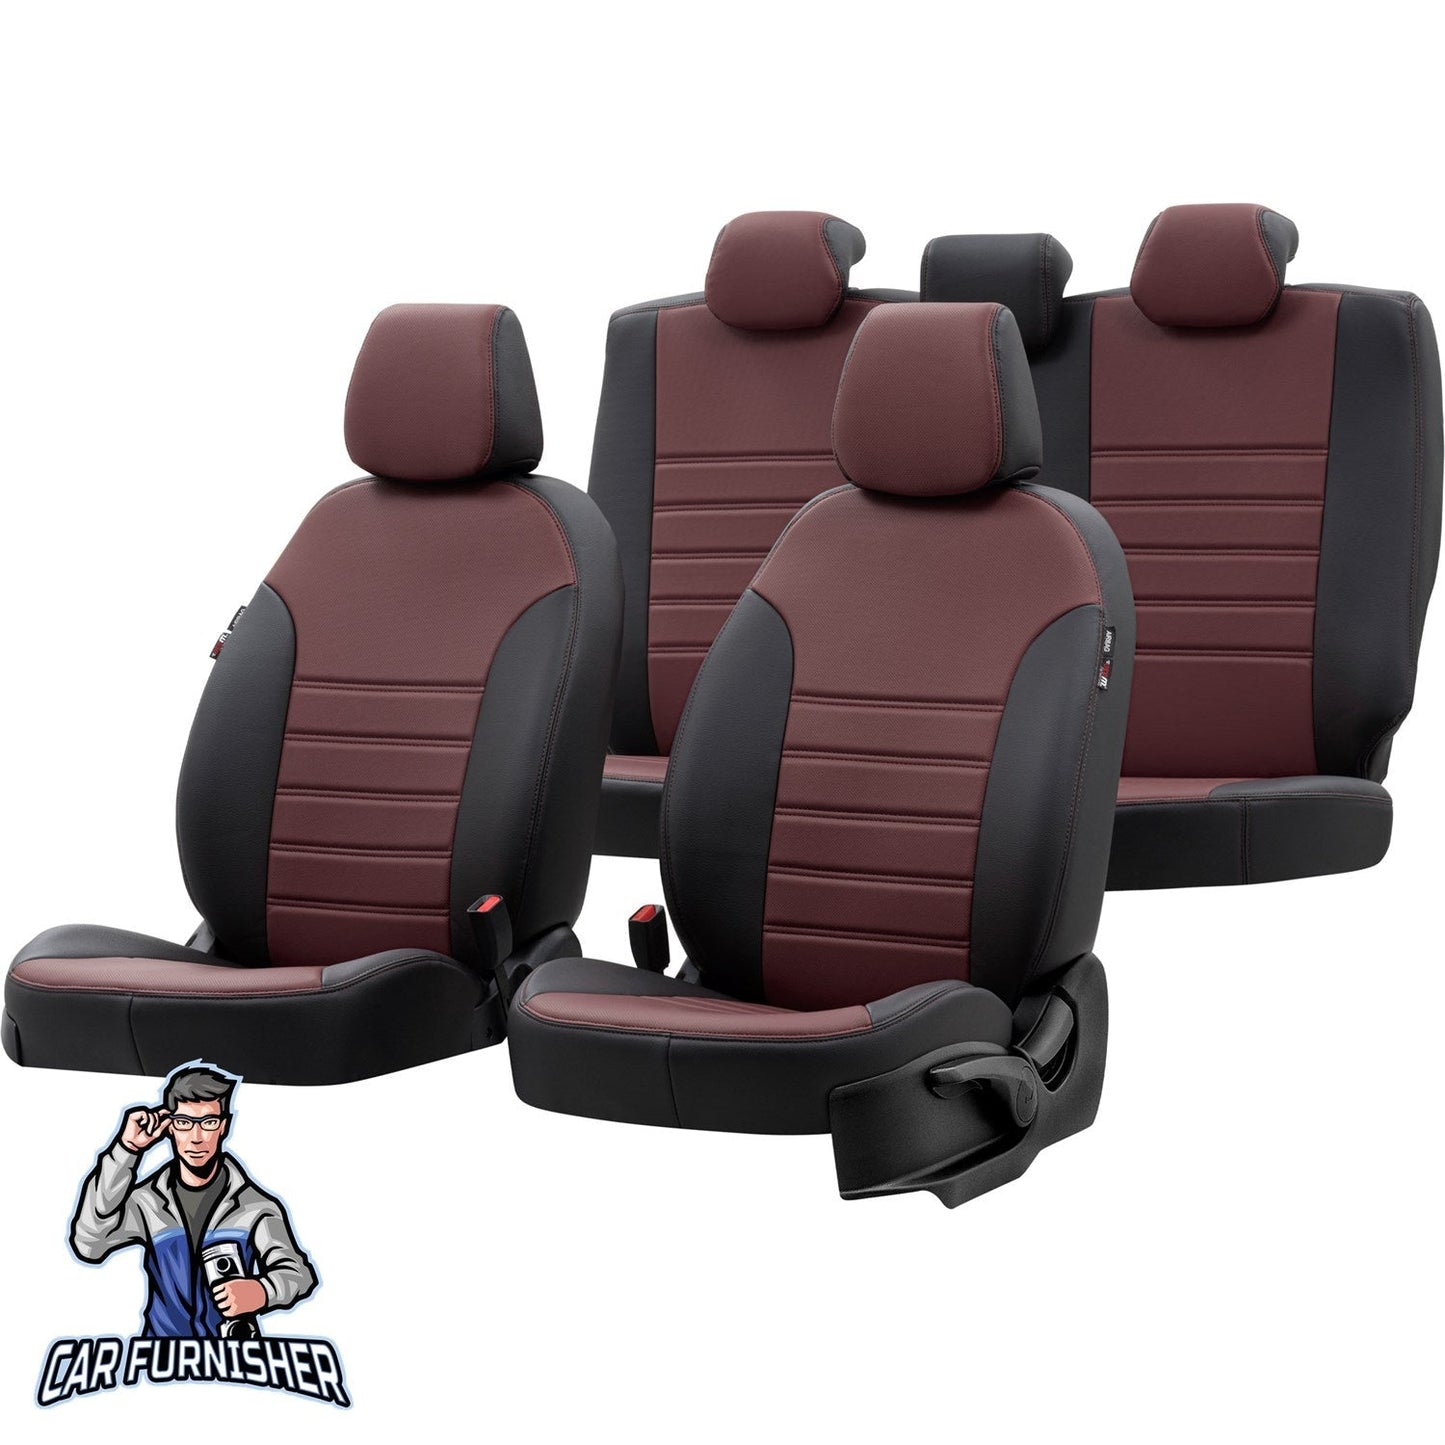 Ford Focus Seat Covers Istanbul Leather Design Burgundy Leather